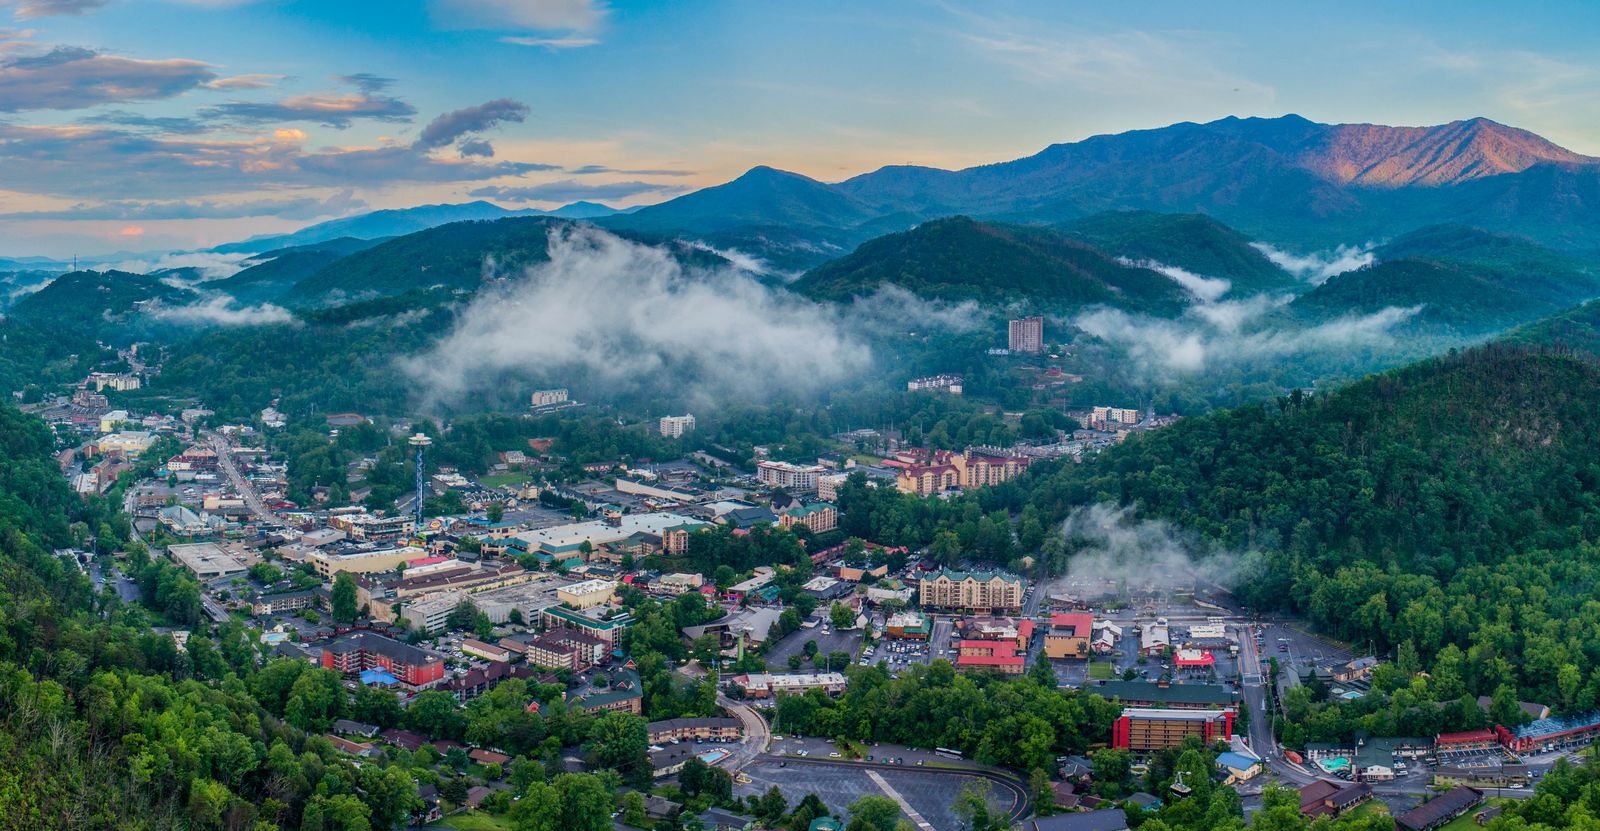 View of Gatlinburg and Things To Do In Gatlinburg